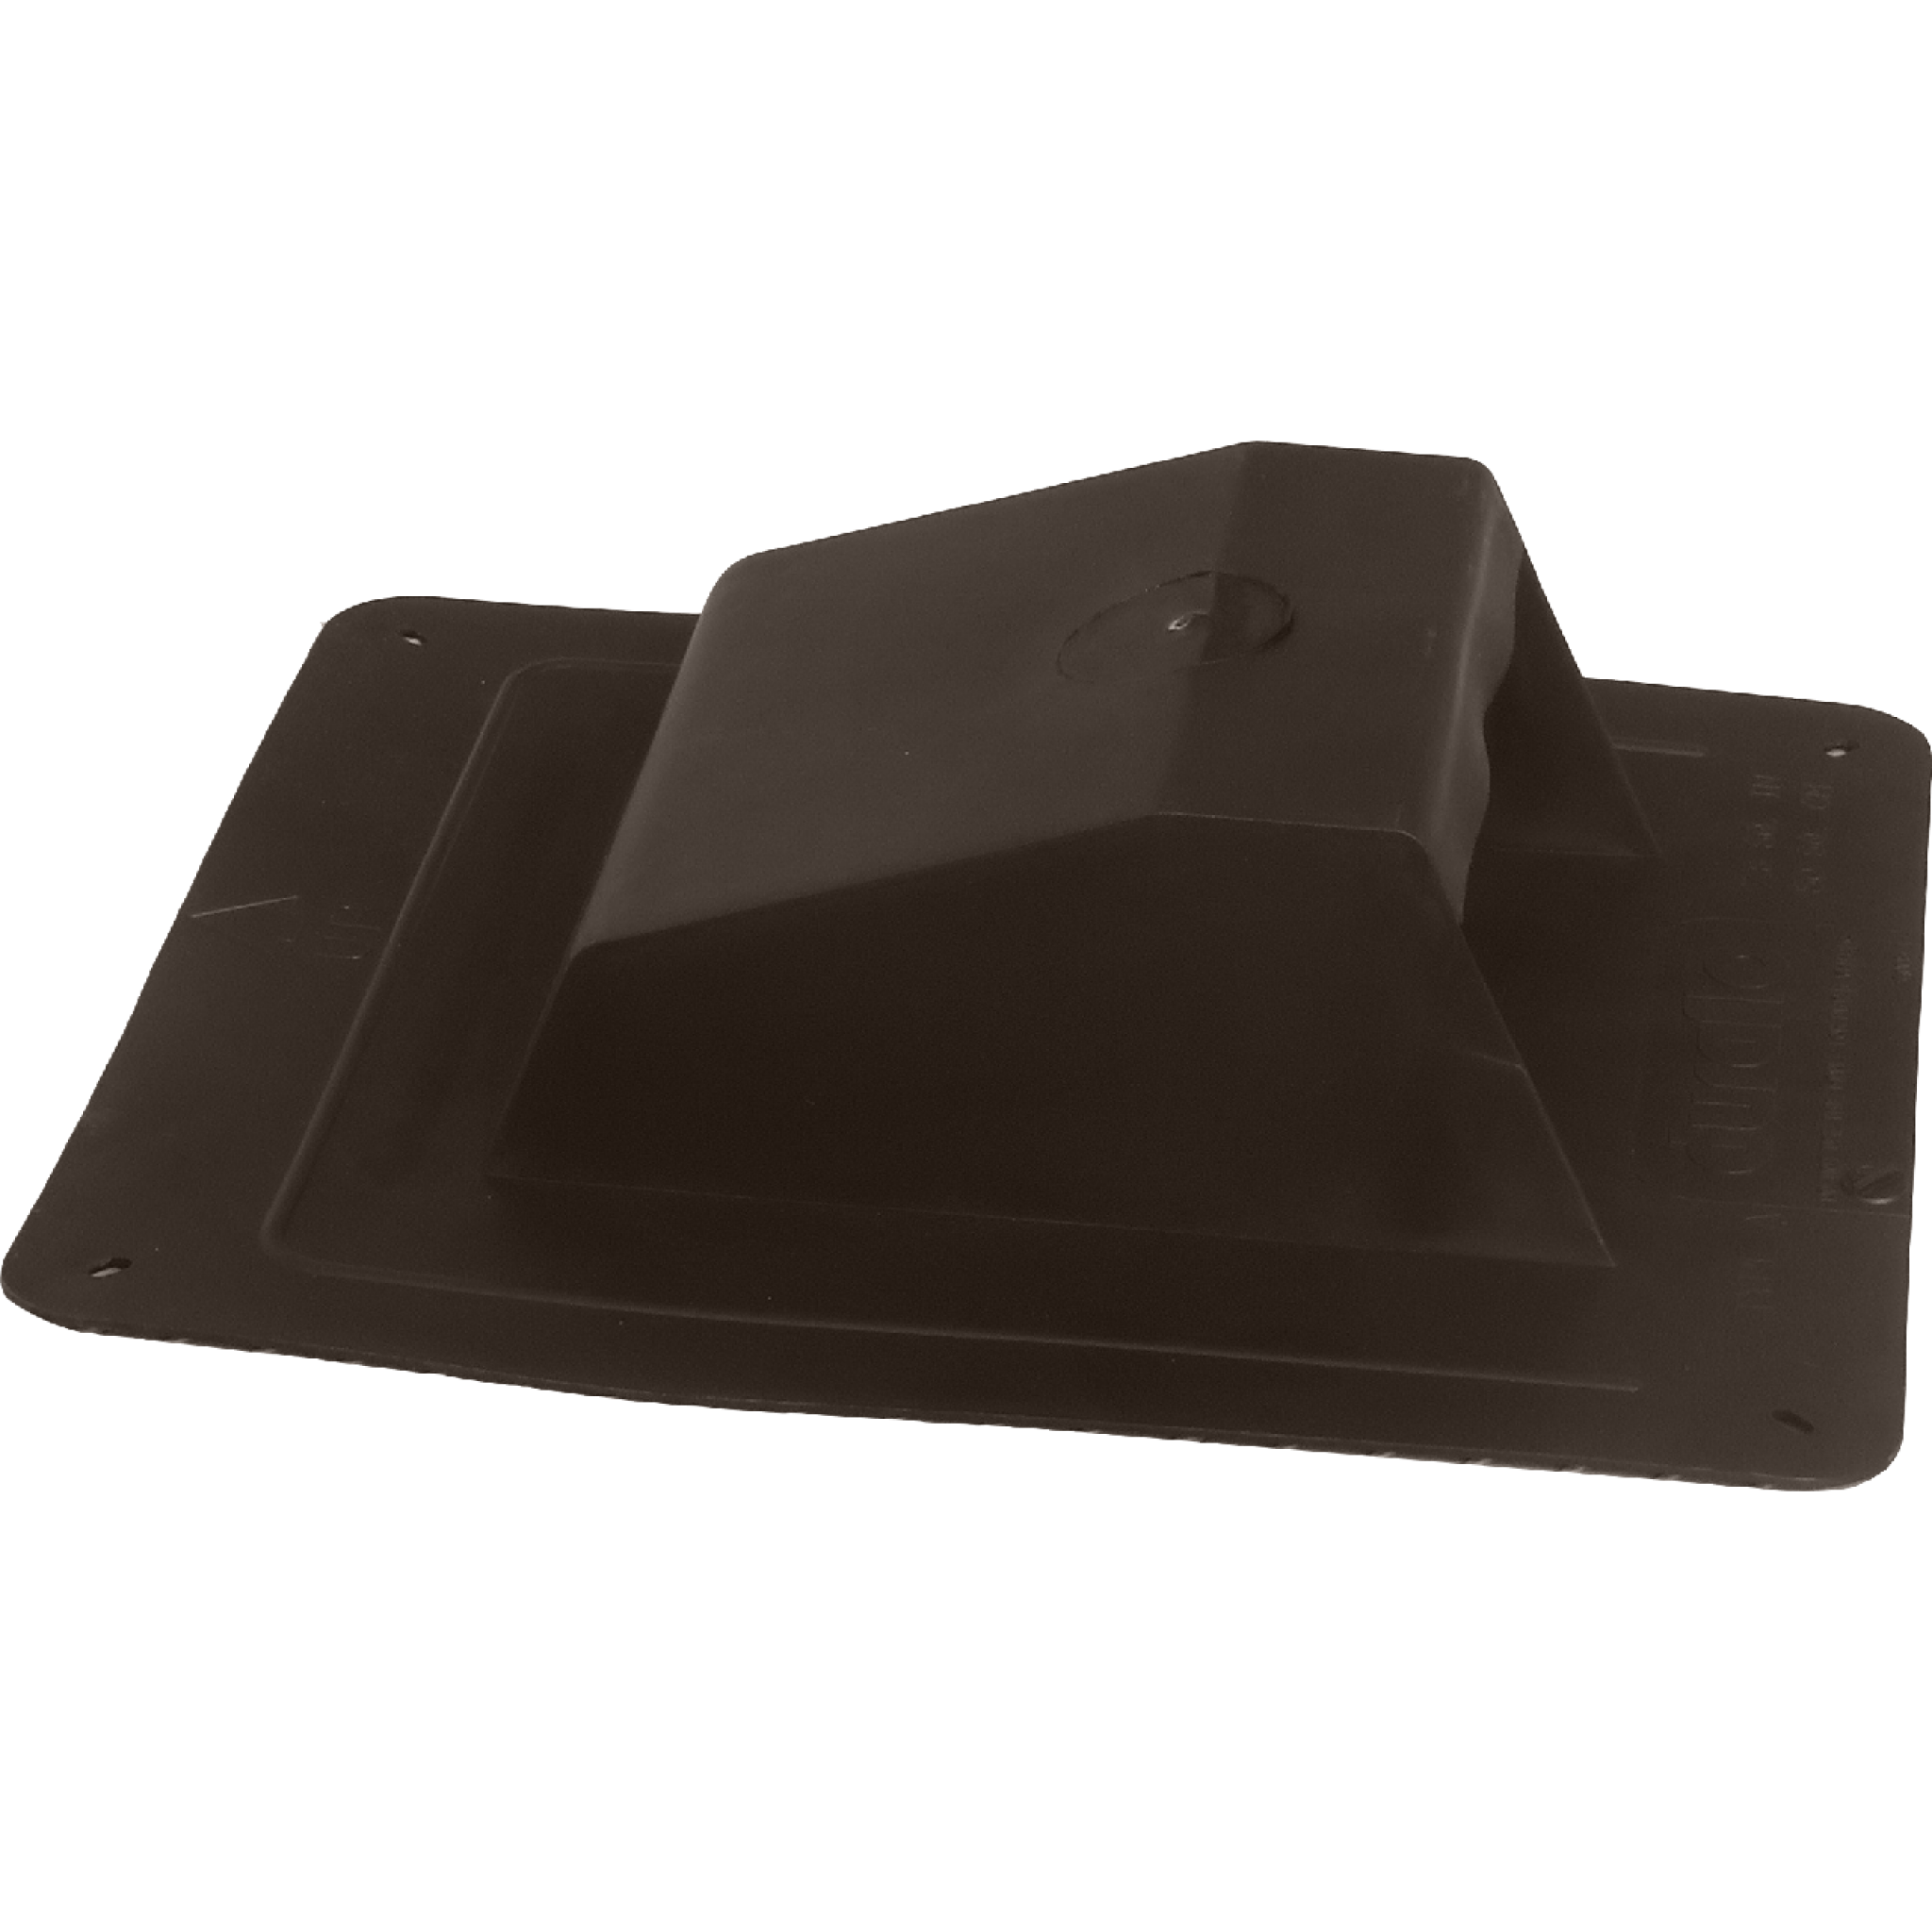 Exhaust Vent with Flapper - Brown